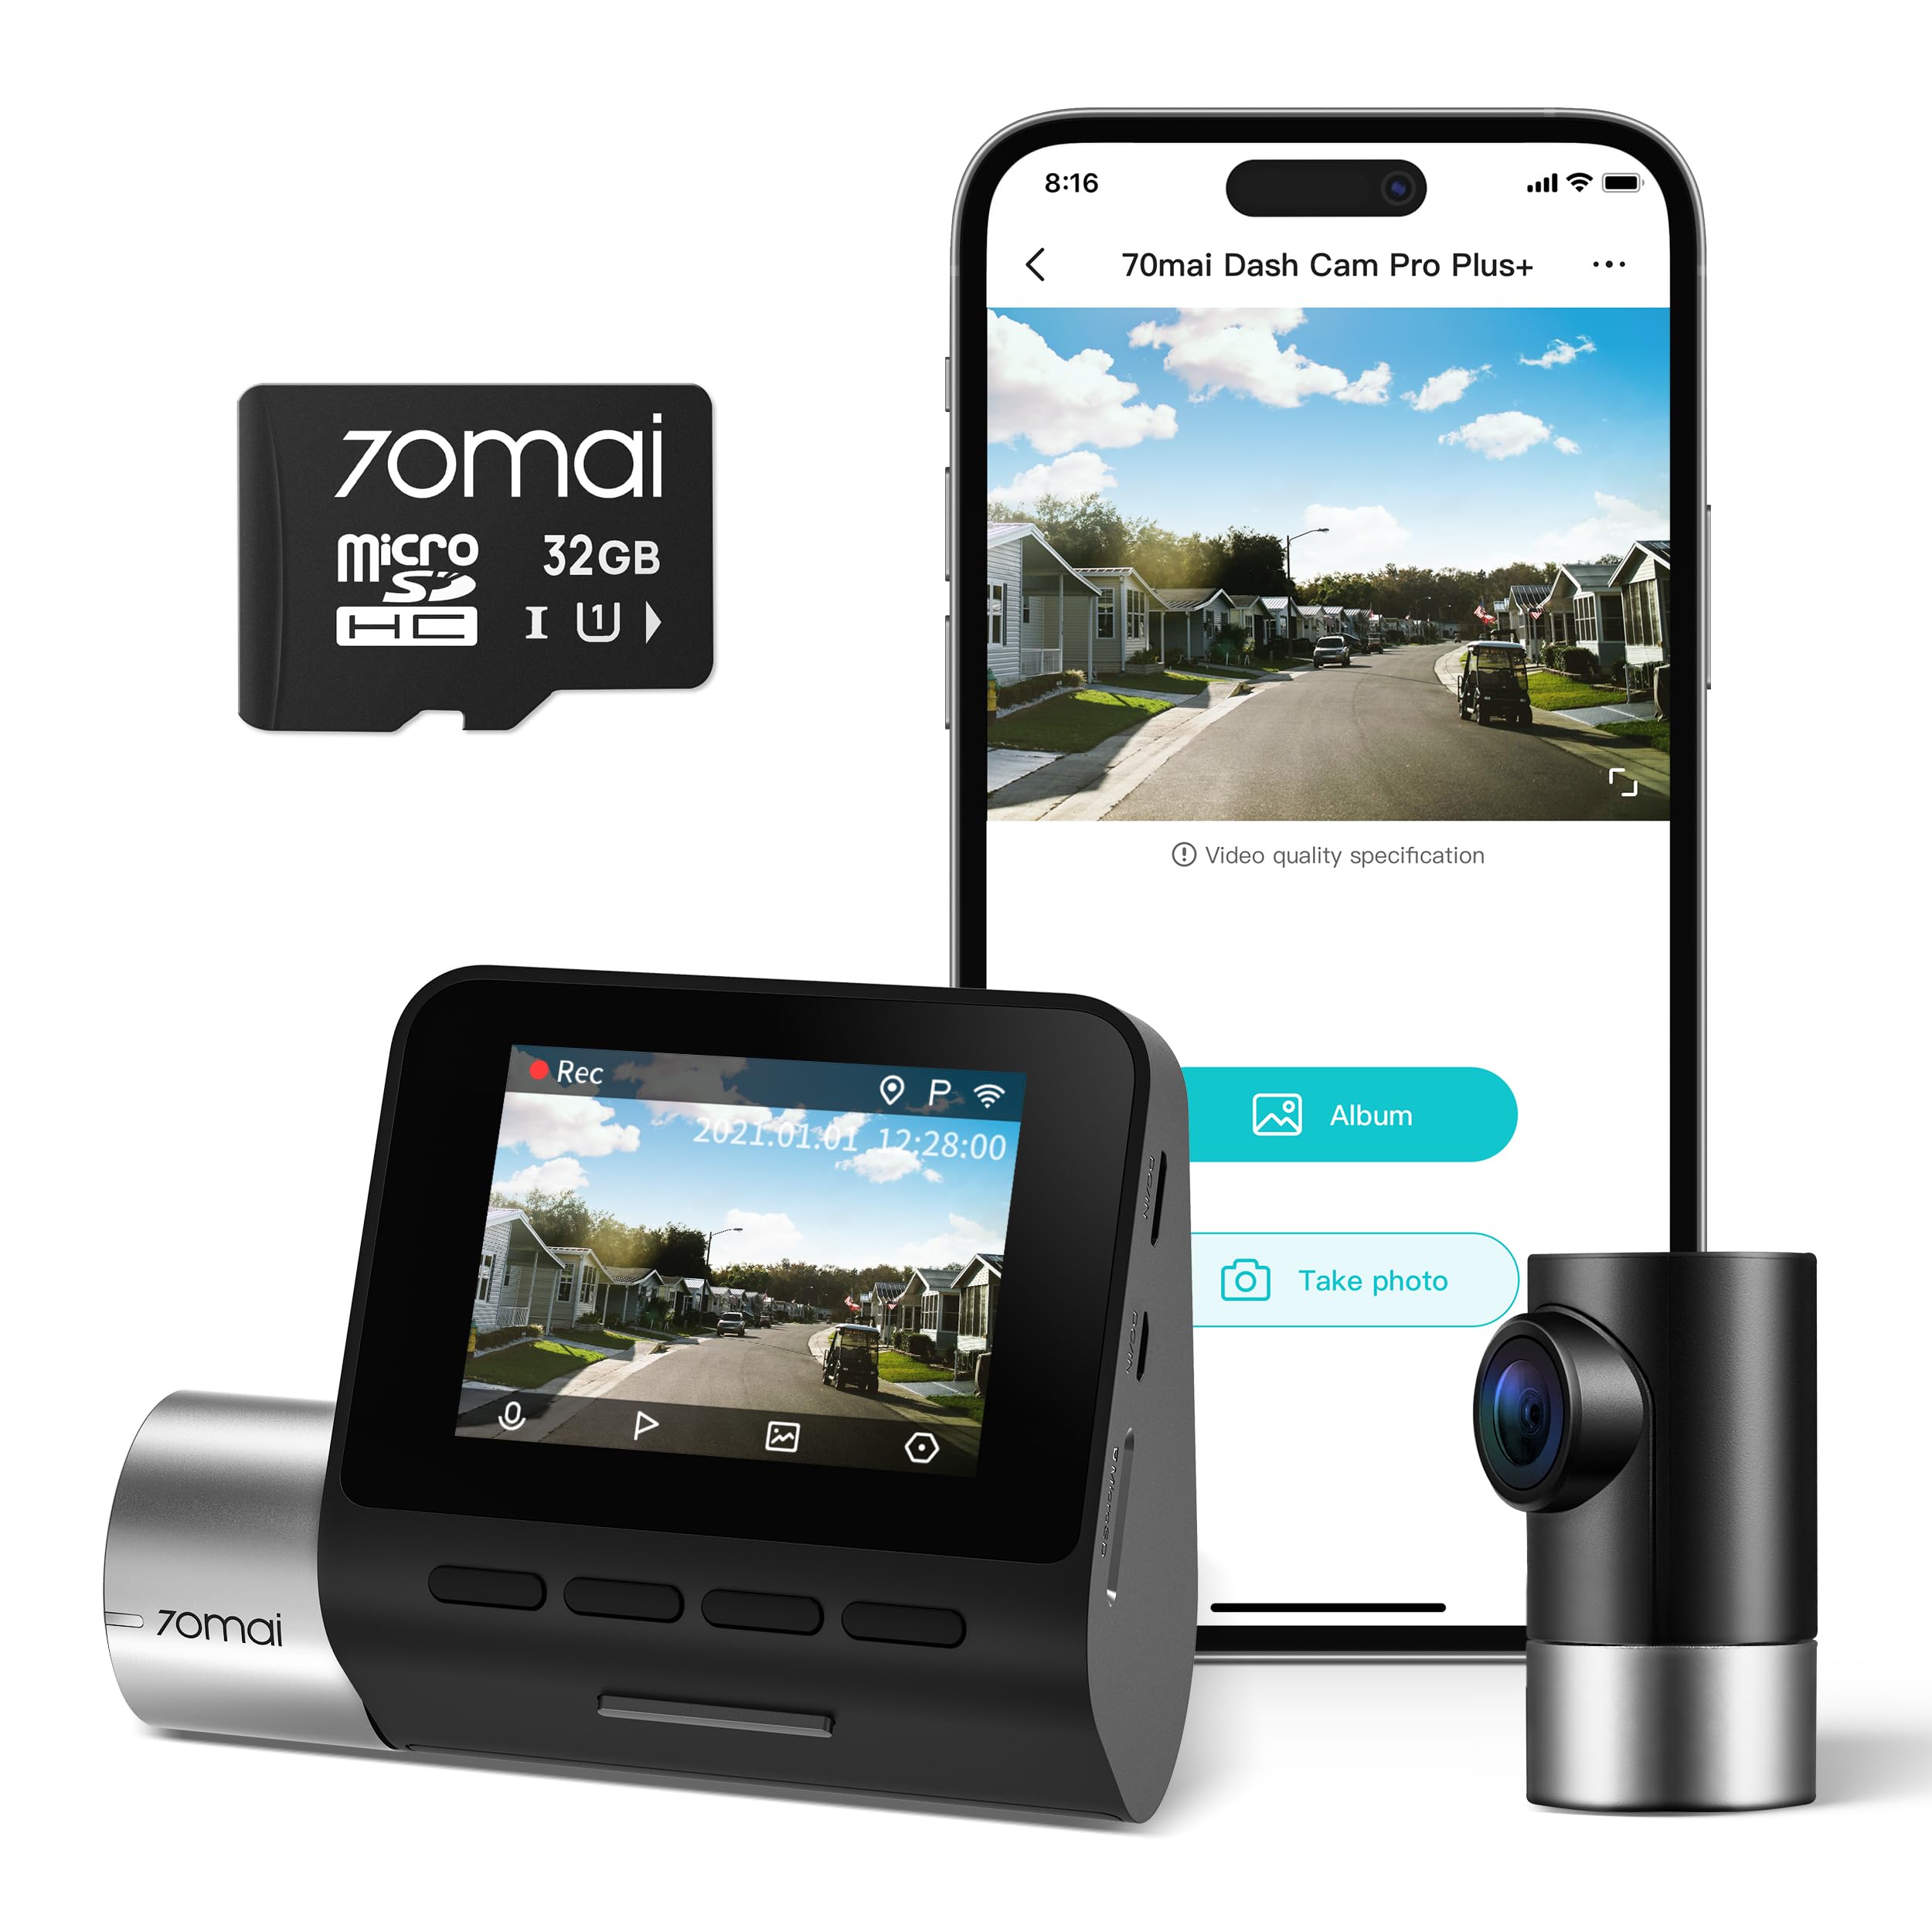 70mai True 2.7K 1944P Ultra Full HD Dash Cam A500S, Front and Rear, 70mai Micro SD Card 32GB, Built in WiFi GPS, ADAS, Sony IMX335, 2'' IPS LCD Screen, WDR, Night Vision